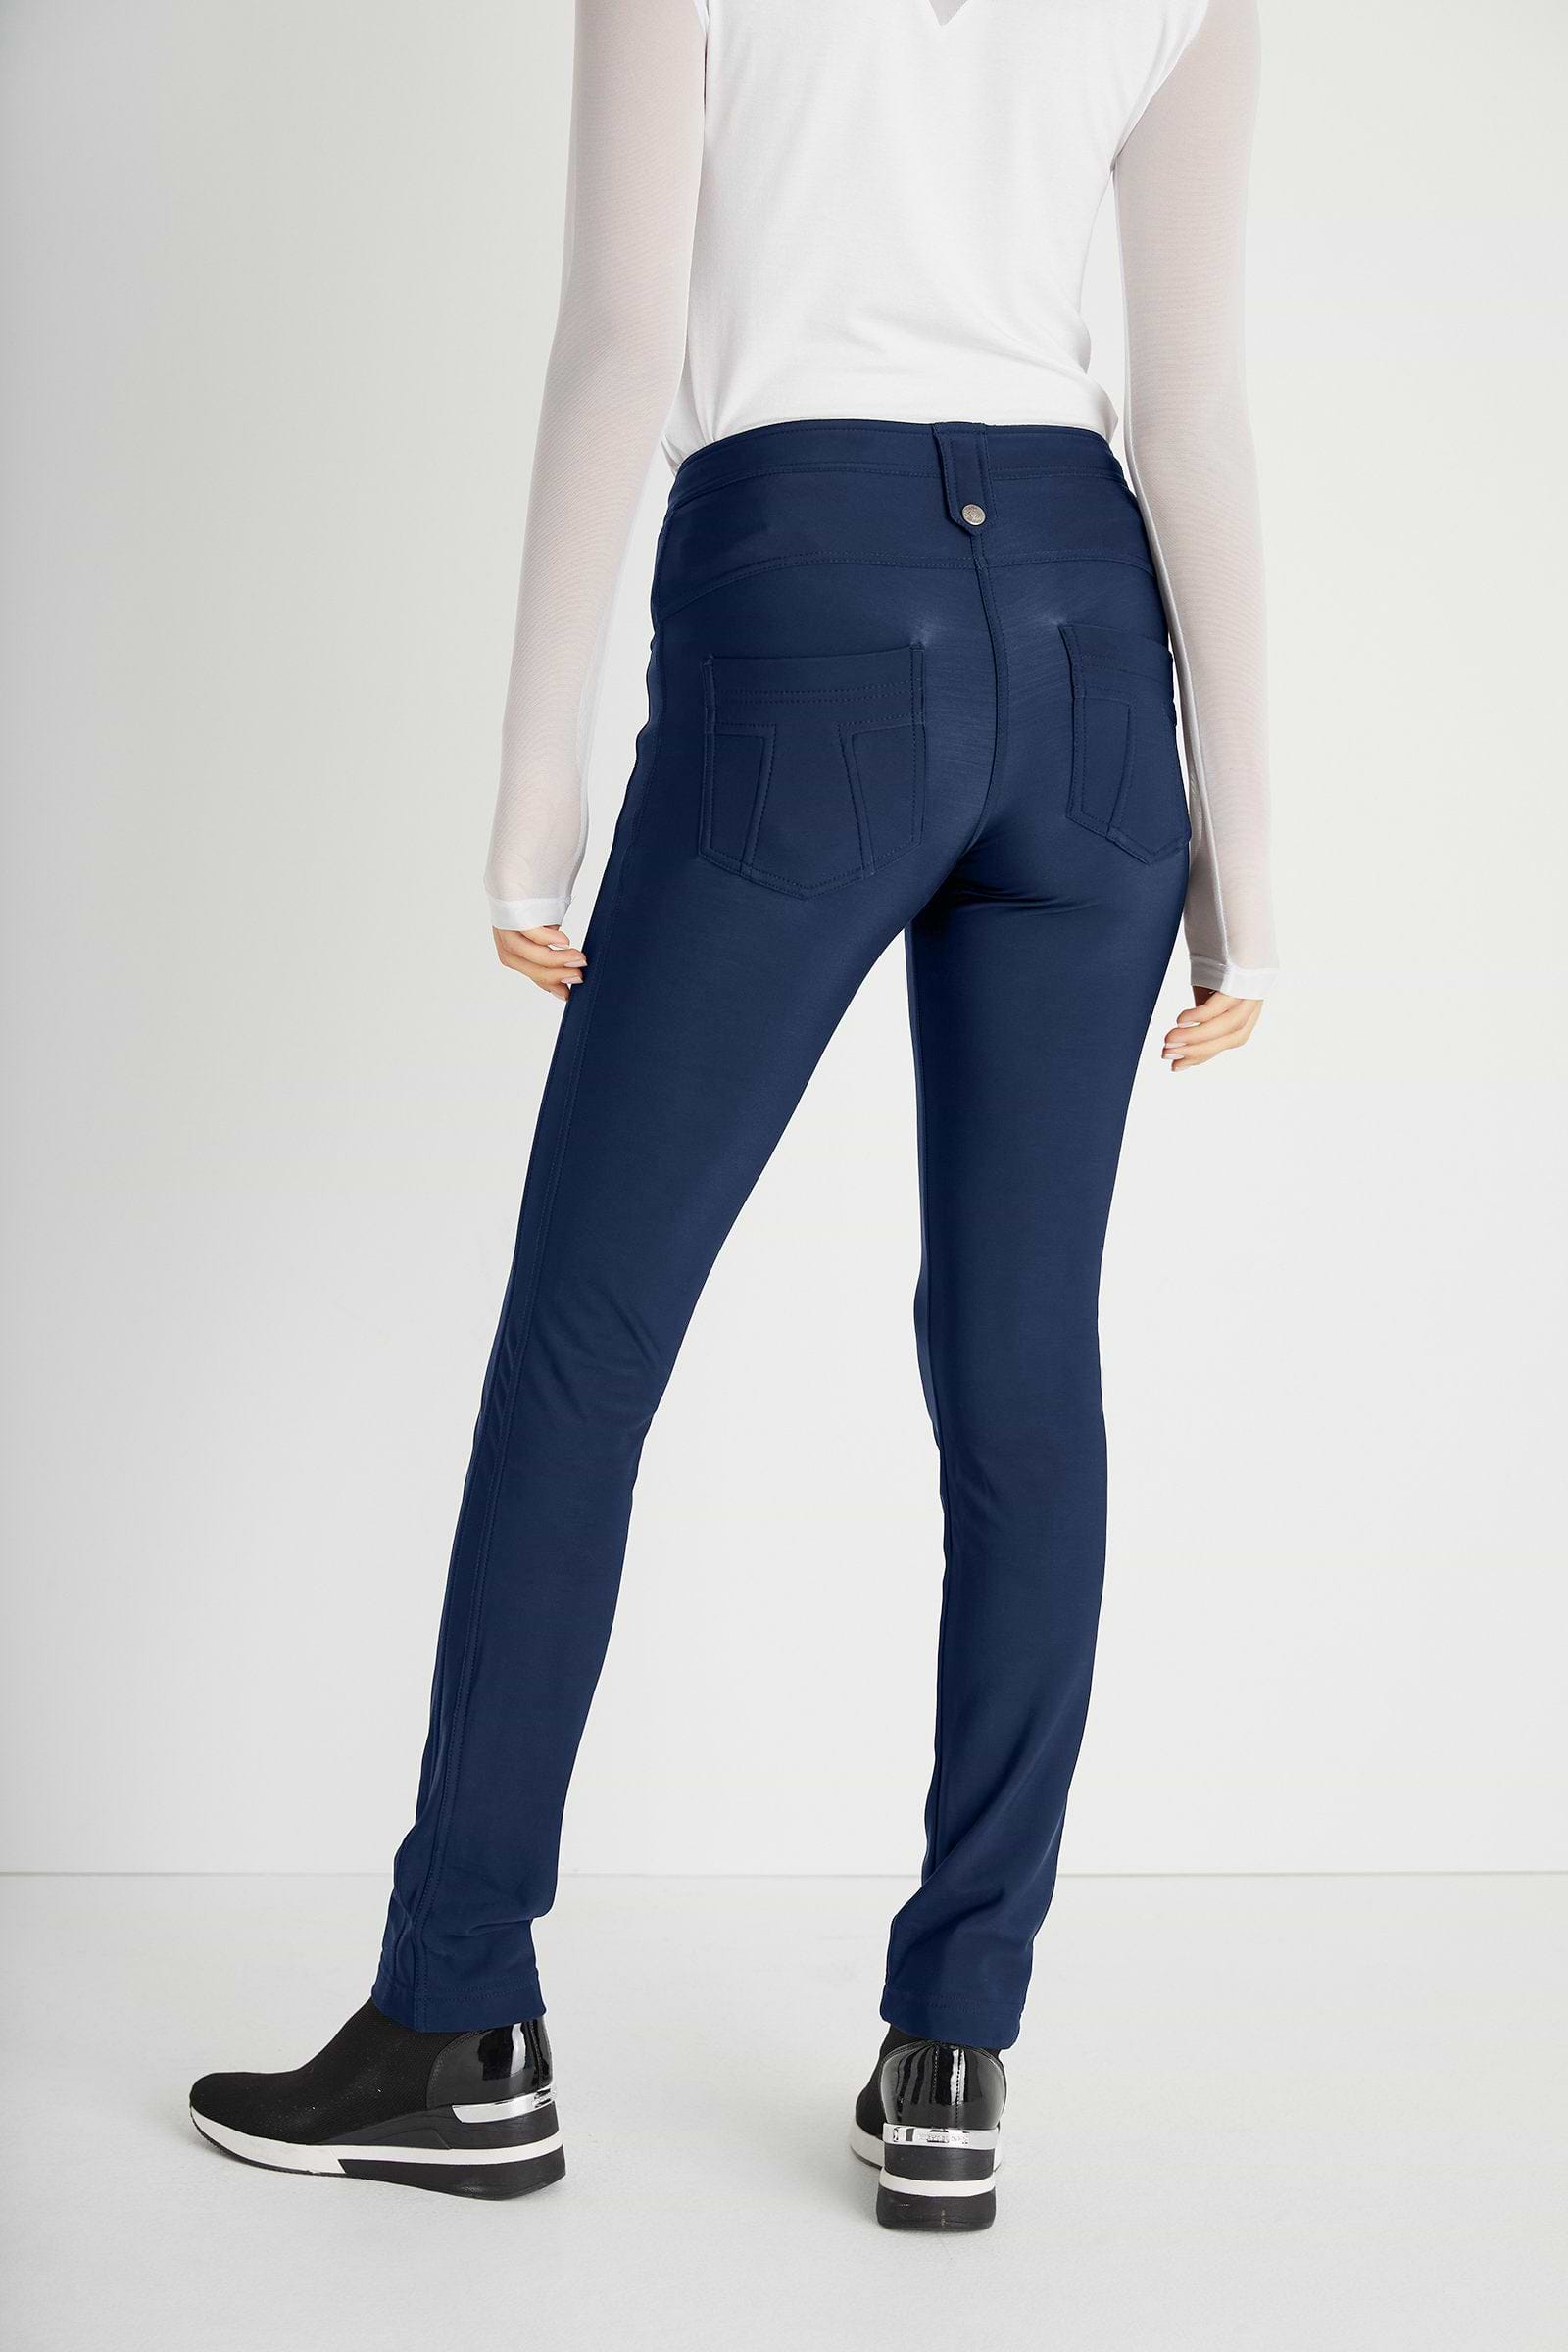 The Best Travel Pants. Back Profile of the Skyler Cozy Fleece-Lined Travel Pant in Navy